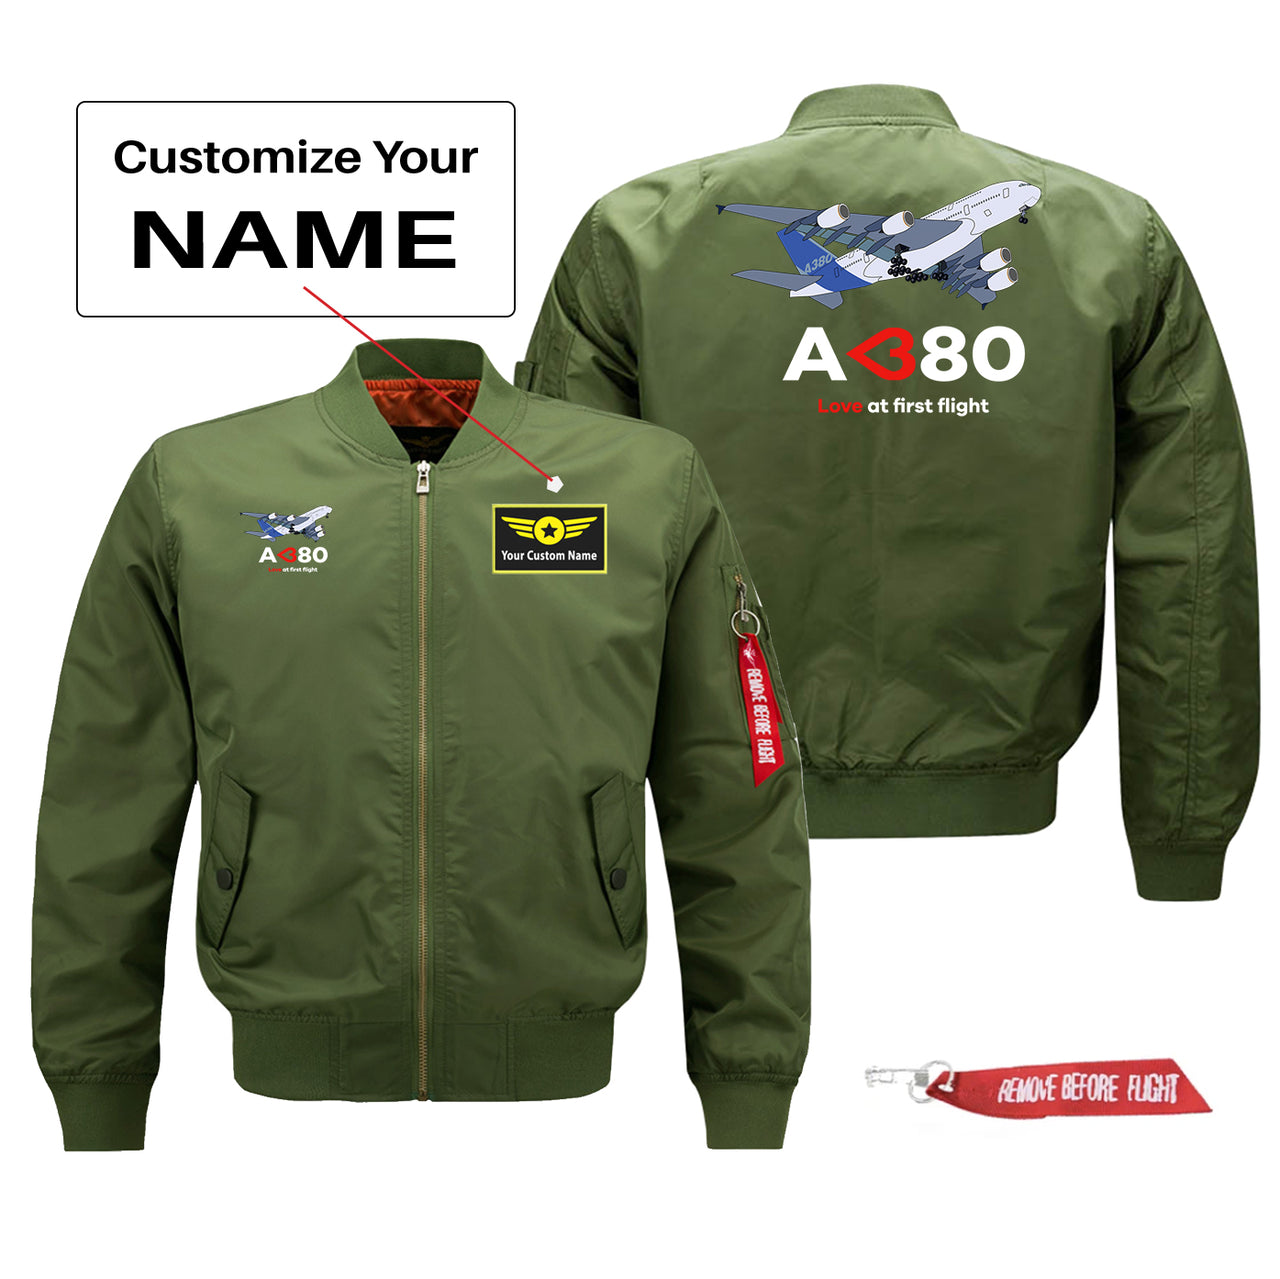 Airbus A380 Love at first flight Designed Pilot Jackets (Customizable)